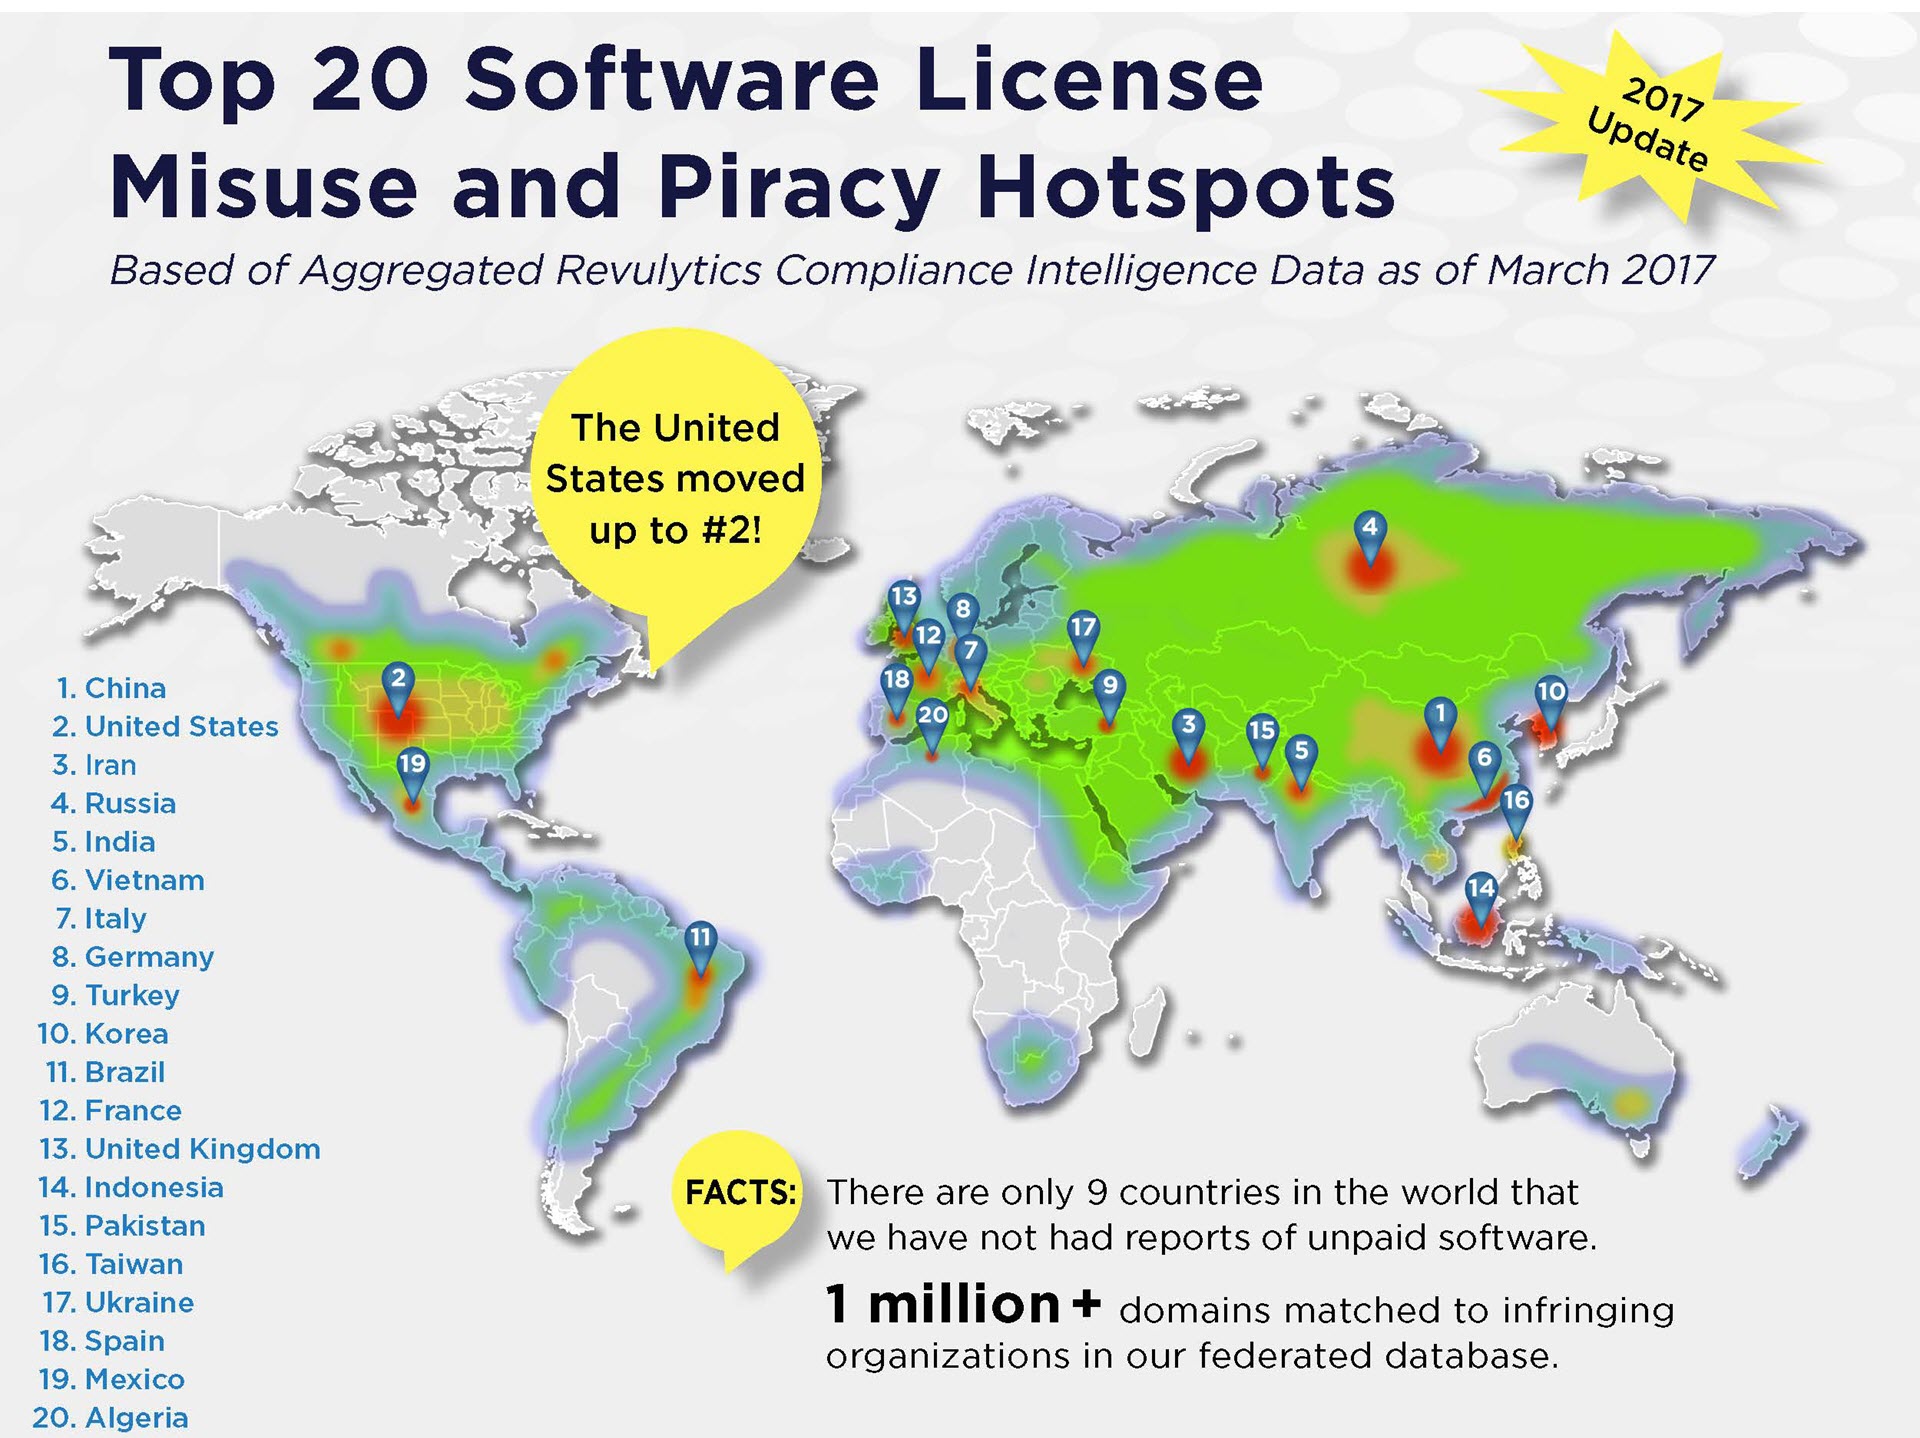 Top 20 Countries for Software Piracy and License Misuse (2017)